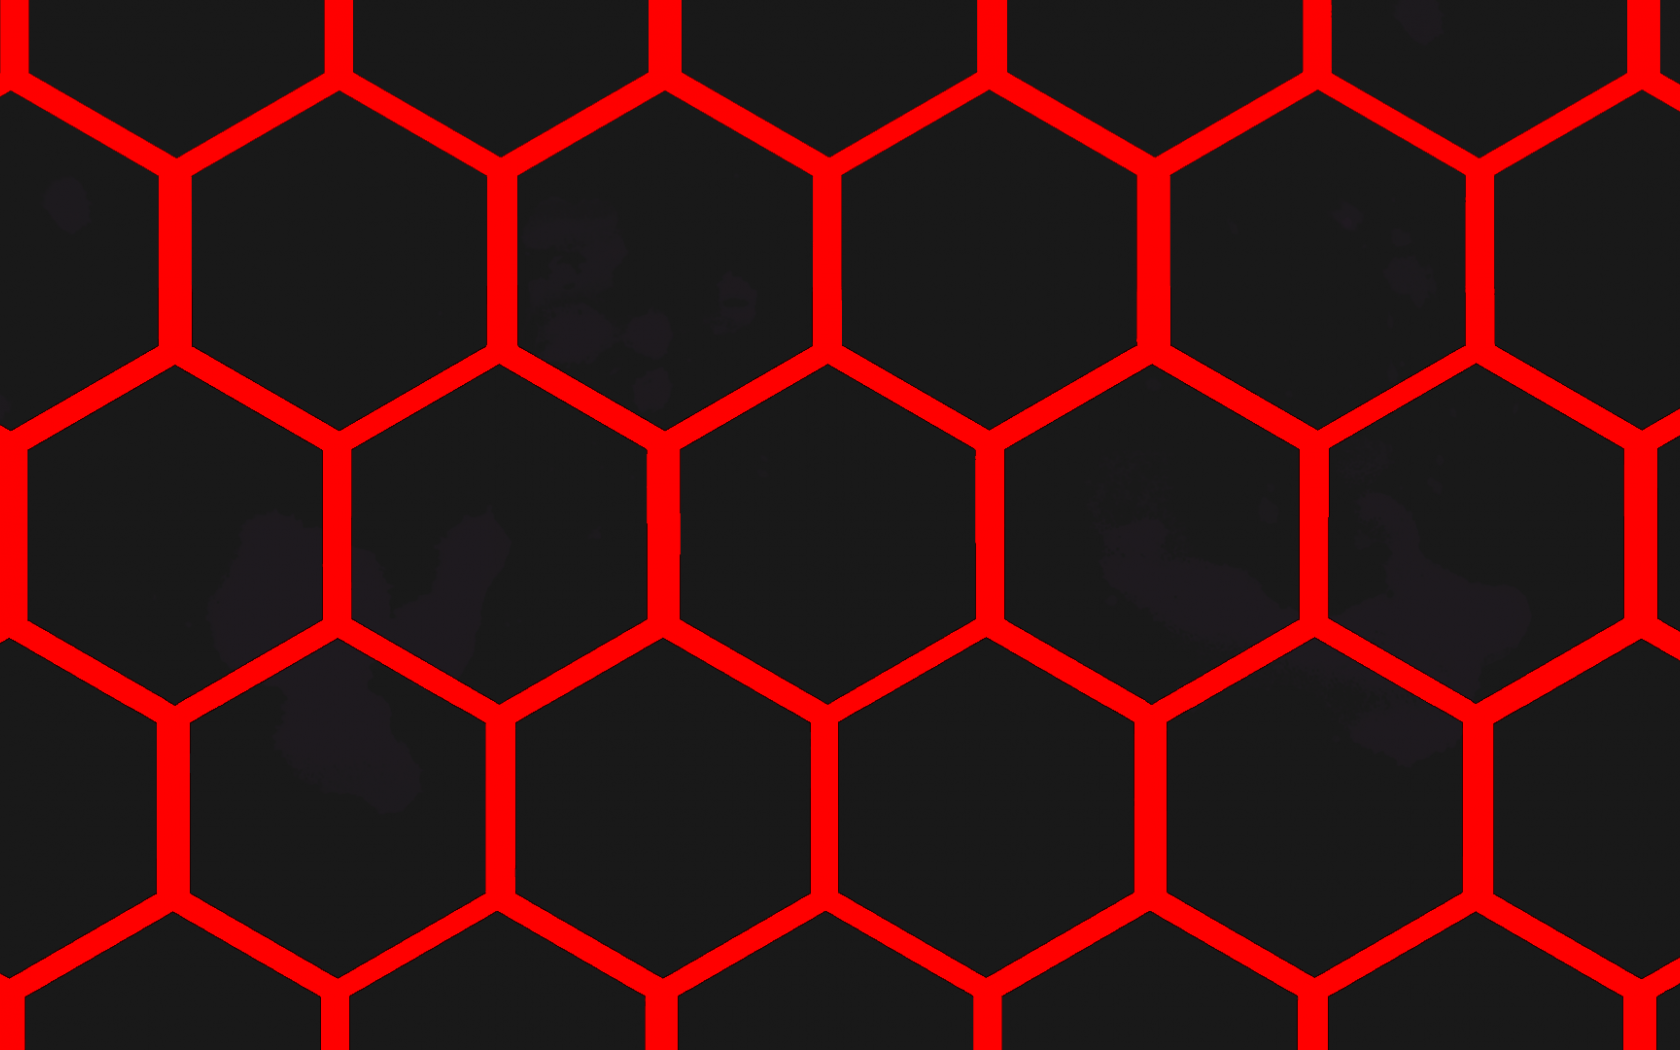 Hive Wallpapers